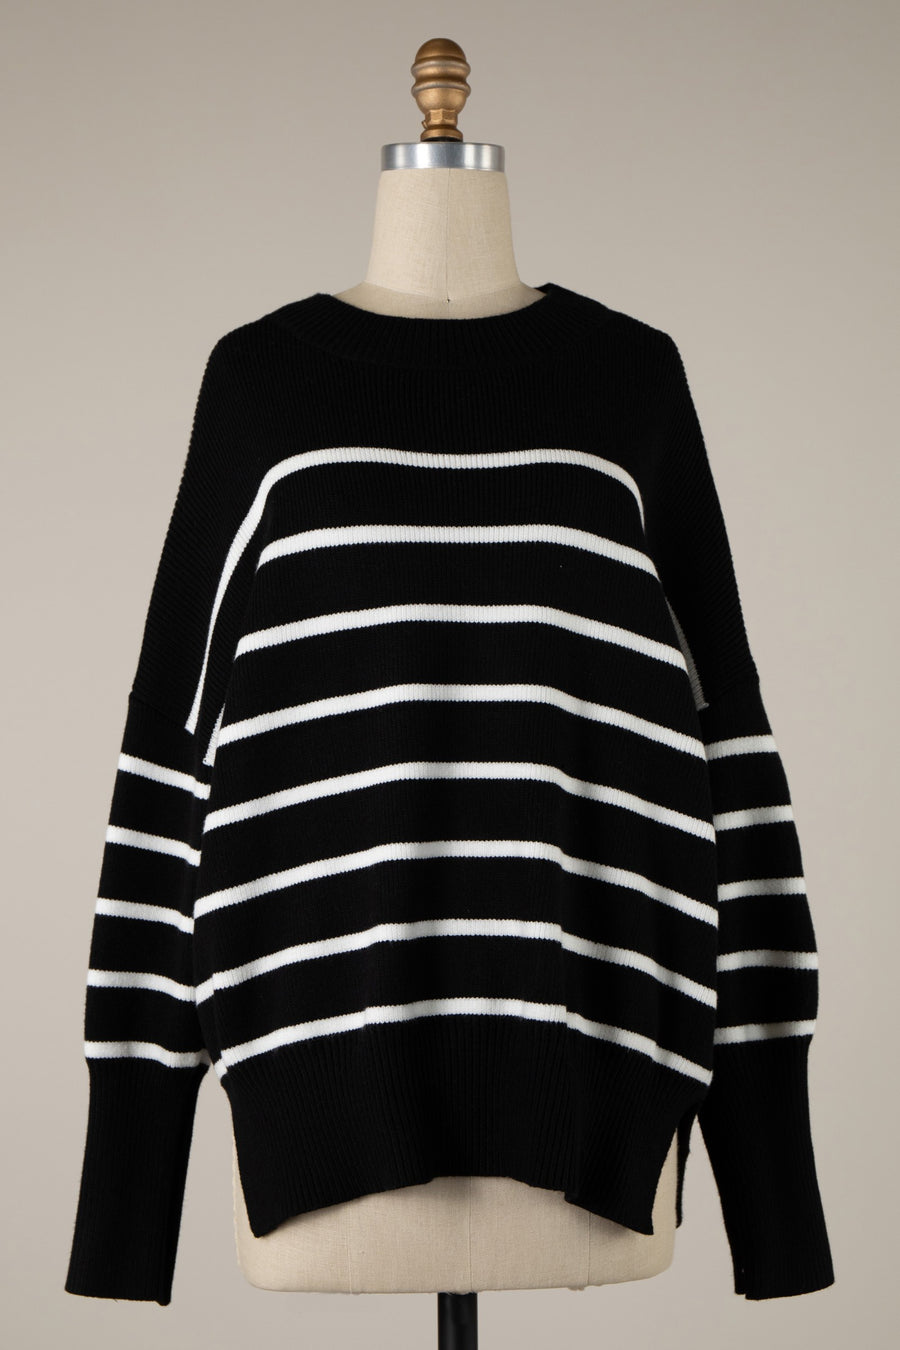 Featuring an over sized stripped black and white crew neck sweater